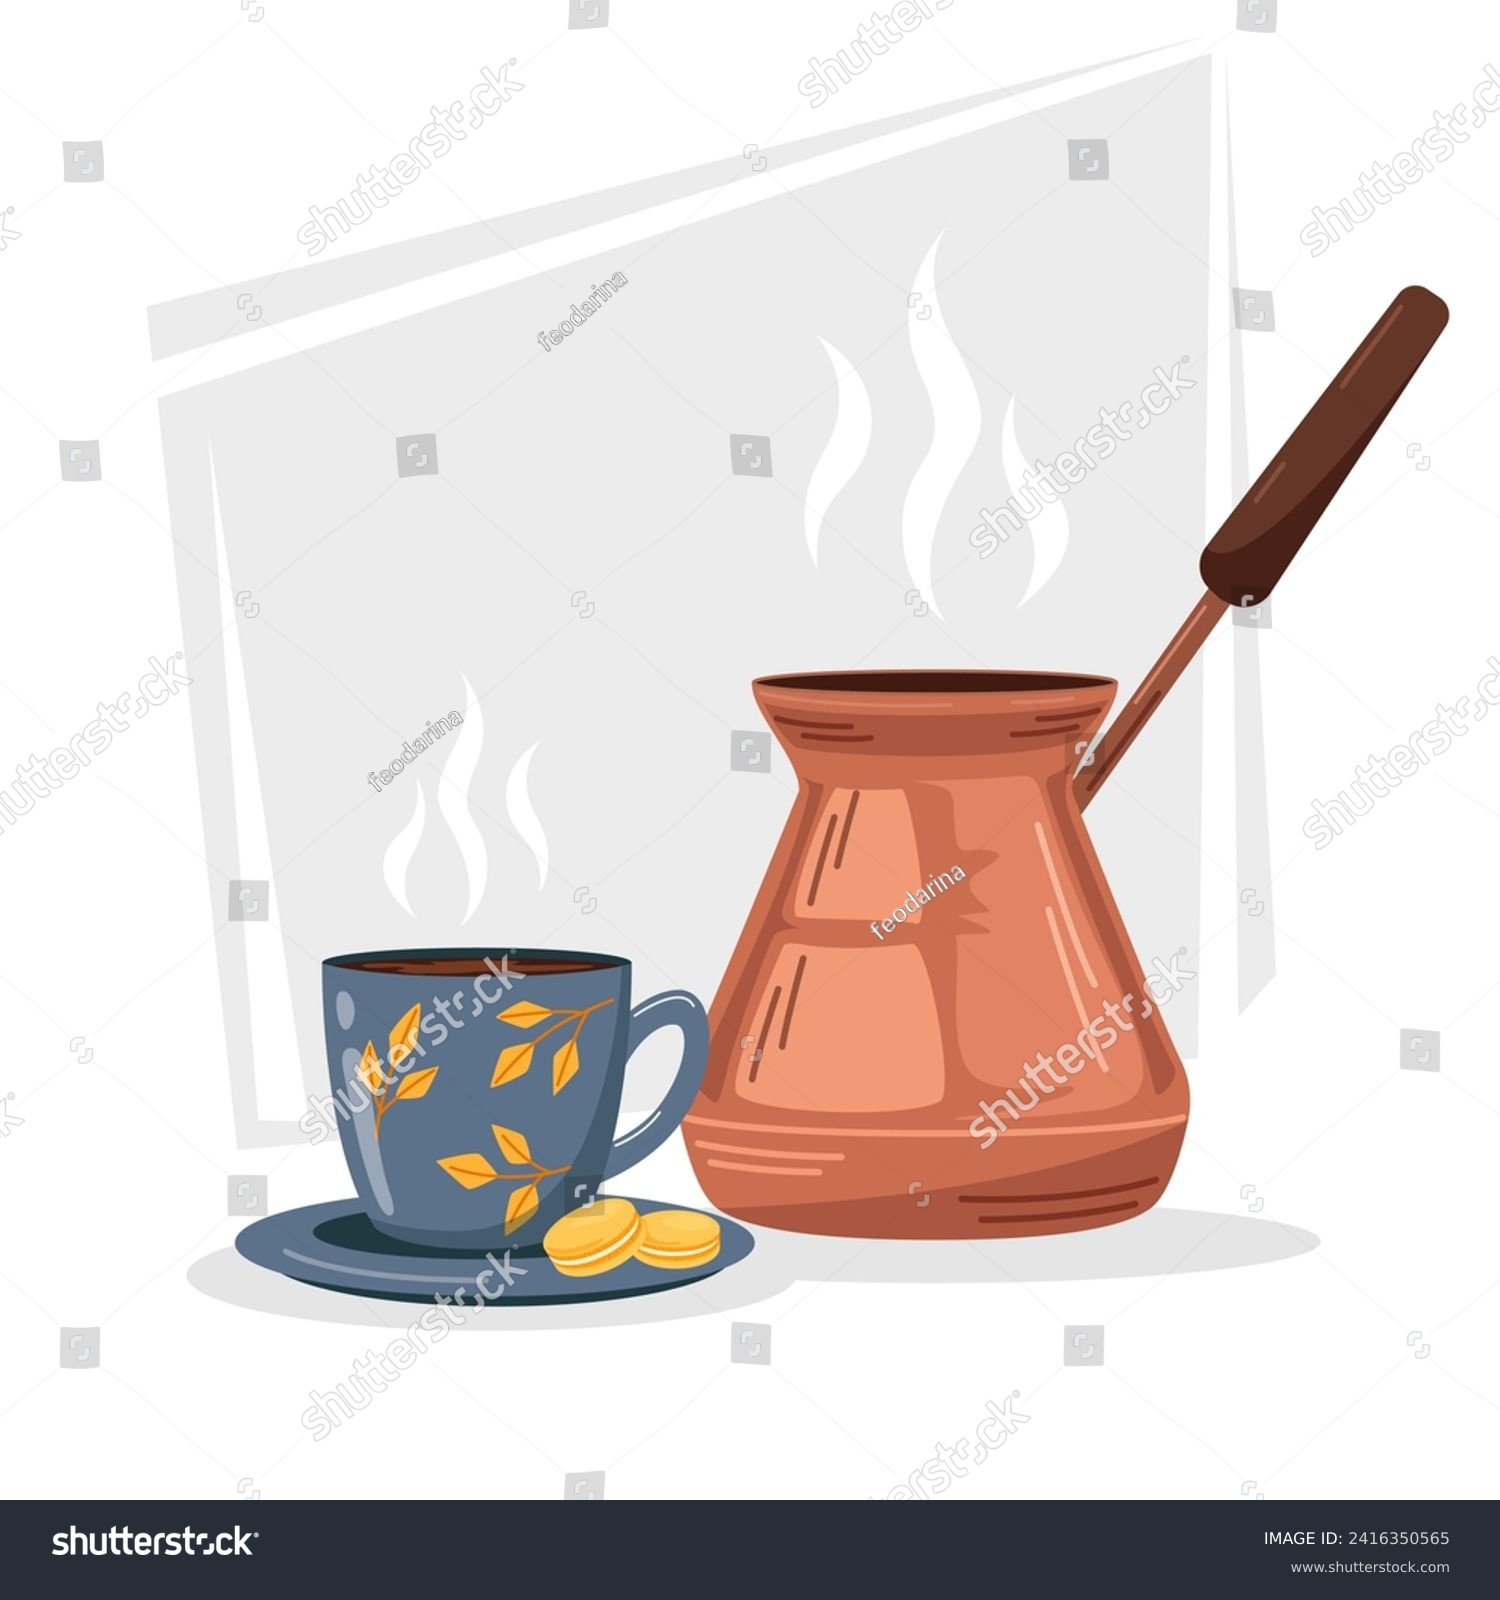 SVG of Vector illustration of a copper Turkish coffee maker and a cup with ready-made hot coffee. Illustration of breakfast, food, drinks. Kitchenware. Equipment for preparing aromatic drinks. svg